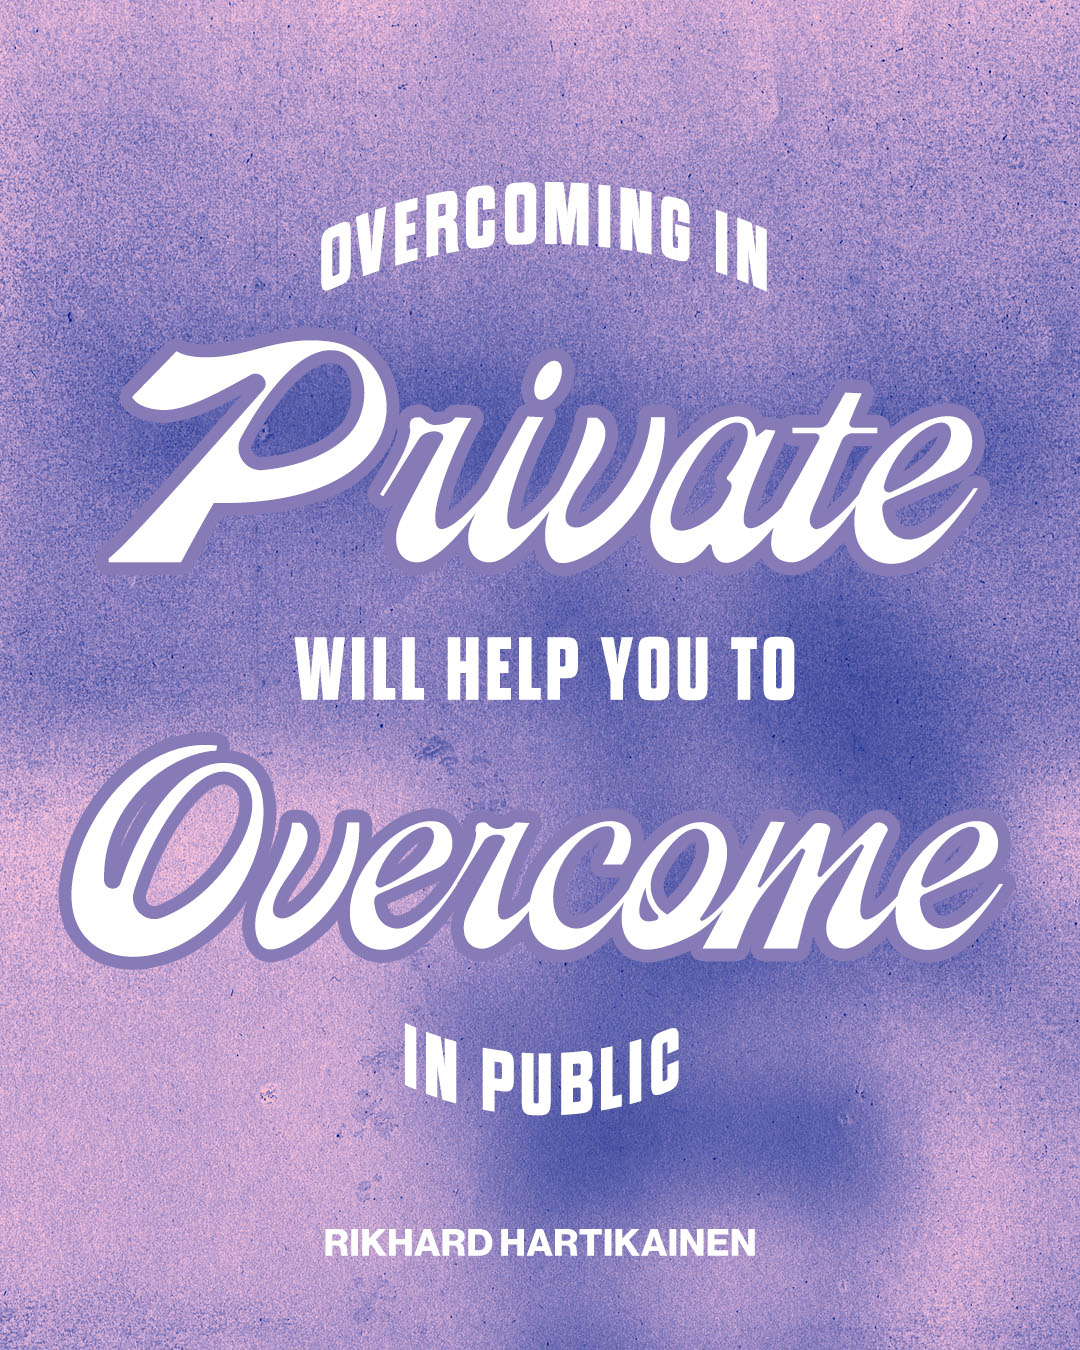 Shareable Quote for “Private Victory”